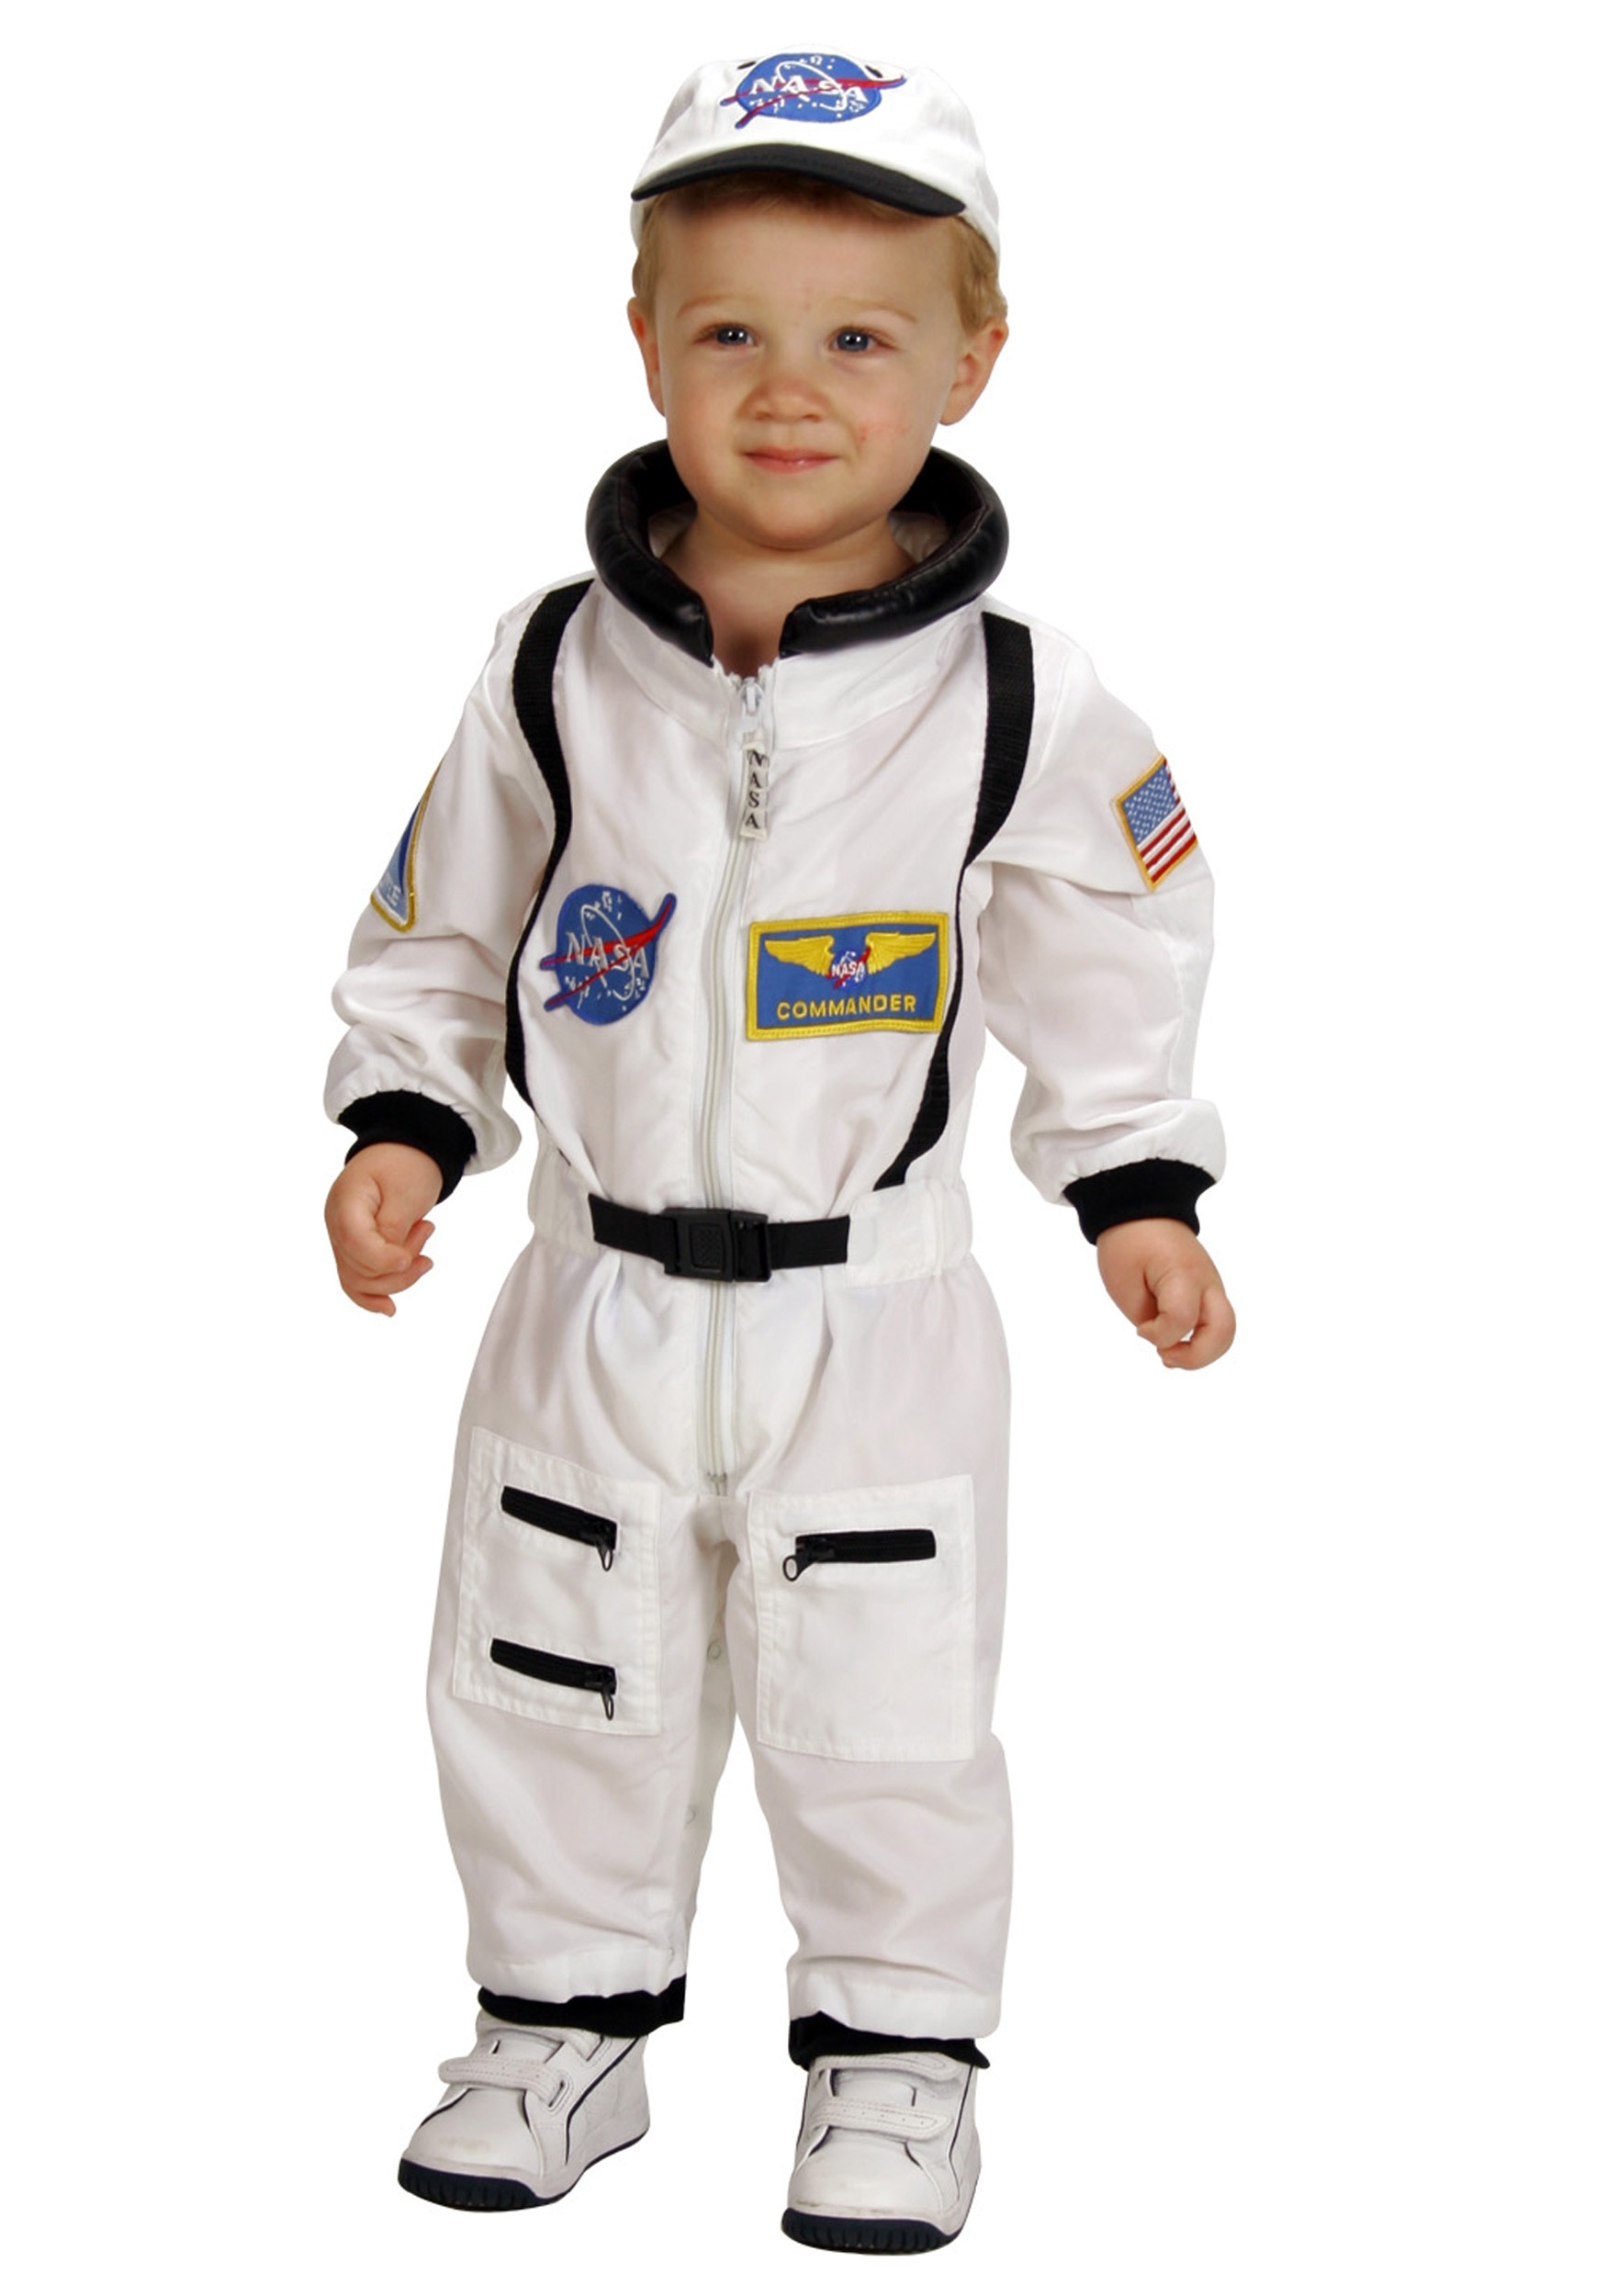 Astronaut Costume For Toddlers